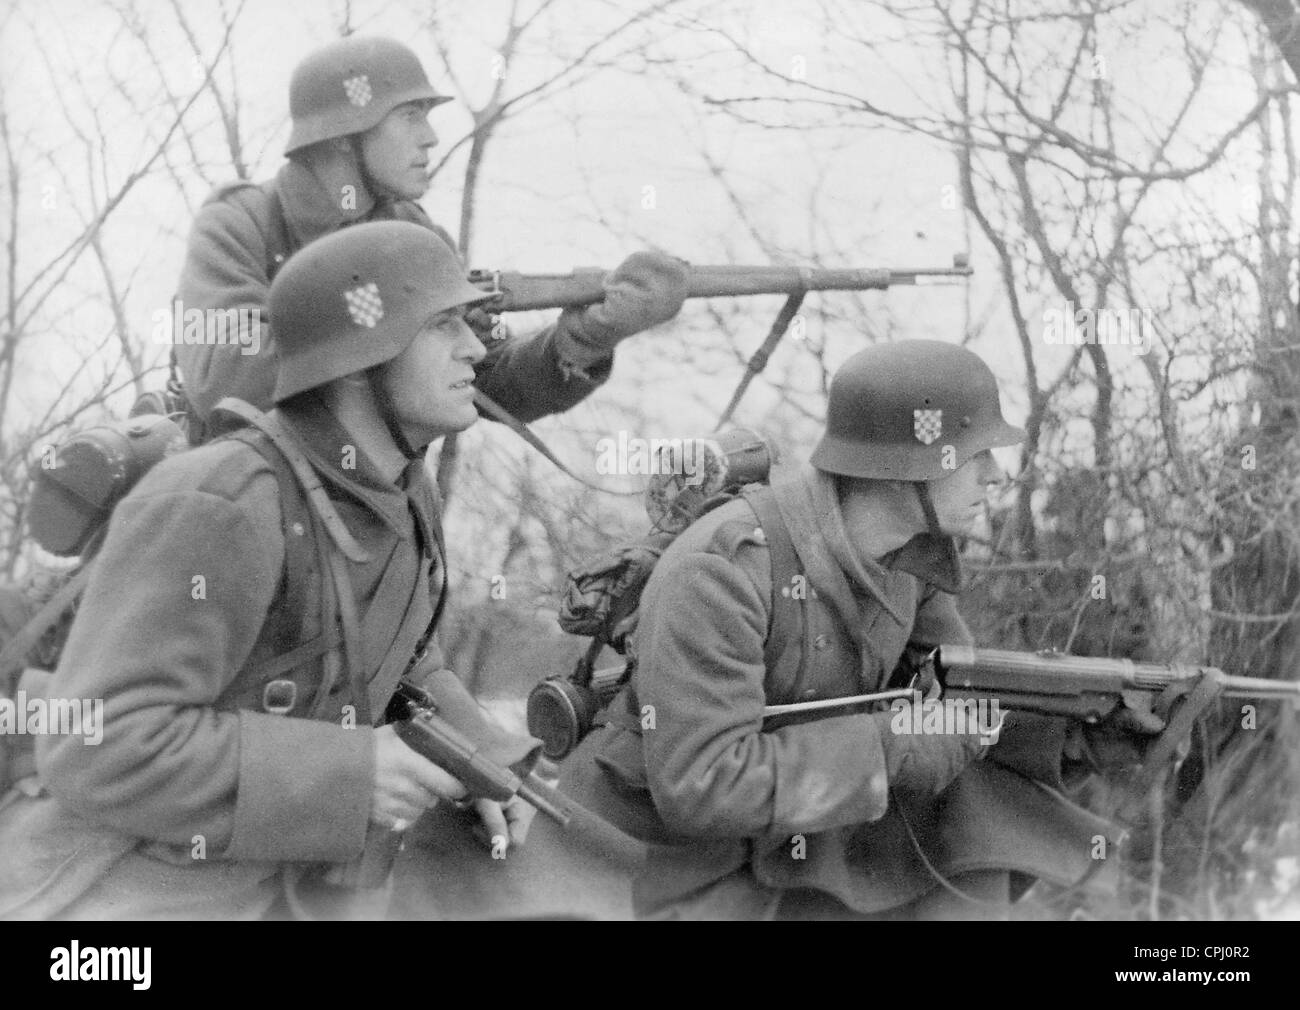 soldiers-of-the-croatian-legion-on-the-eastern-front-1942-CPJ0R2.jpg